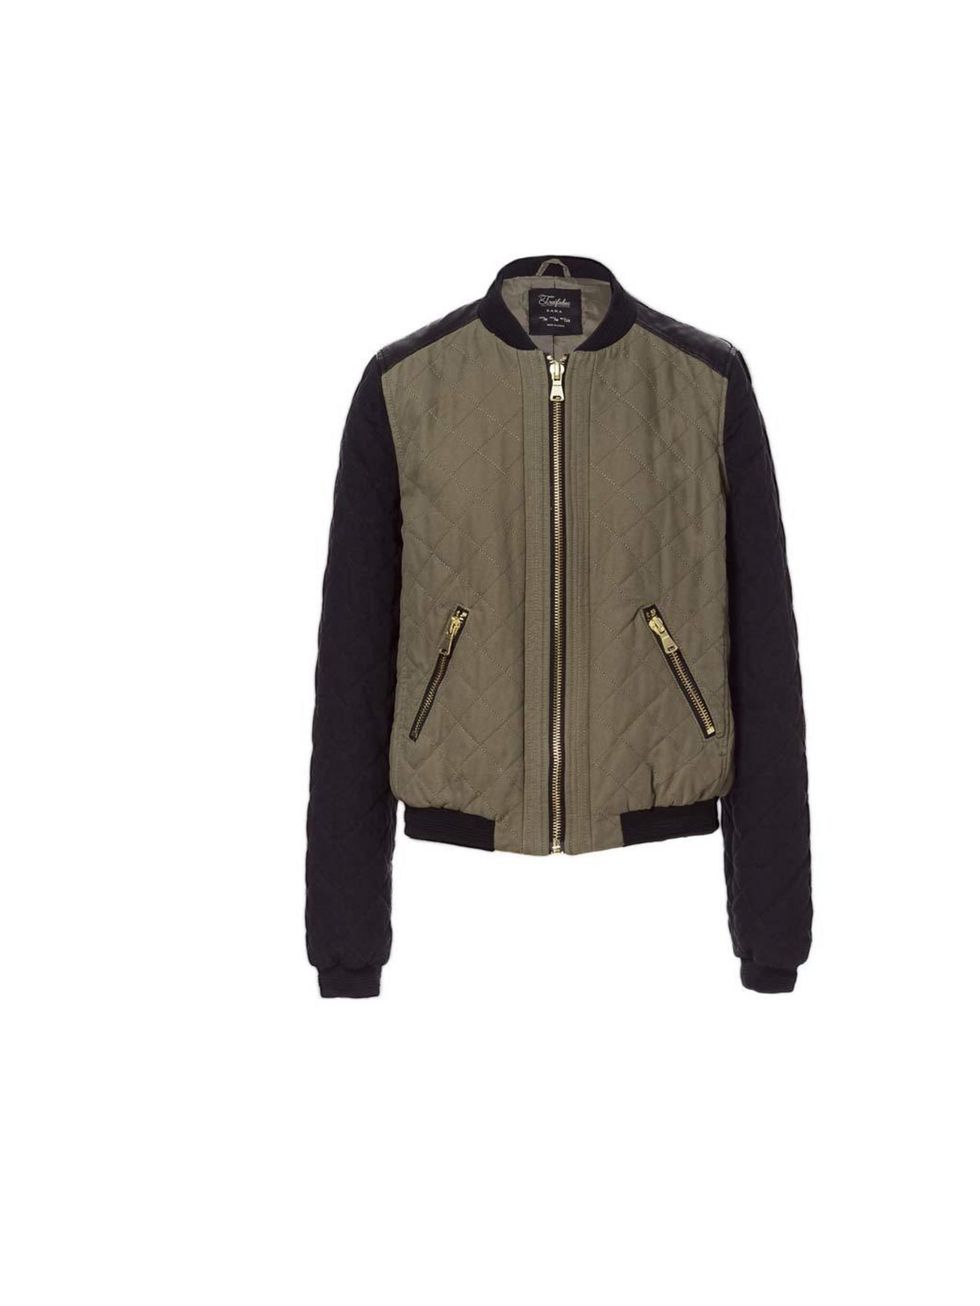 <p>Team the look with a leather and khaki bomber jacket like this from <a href="http://www.zara.com/uk/en/trf/blazers/quilted-bowling-jacket-c436585p1047782.html">Zara</a>, £39.99</p>